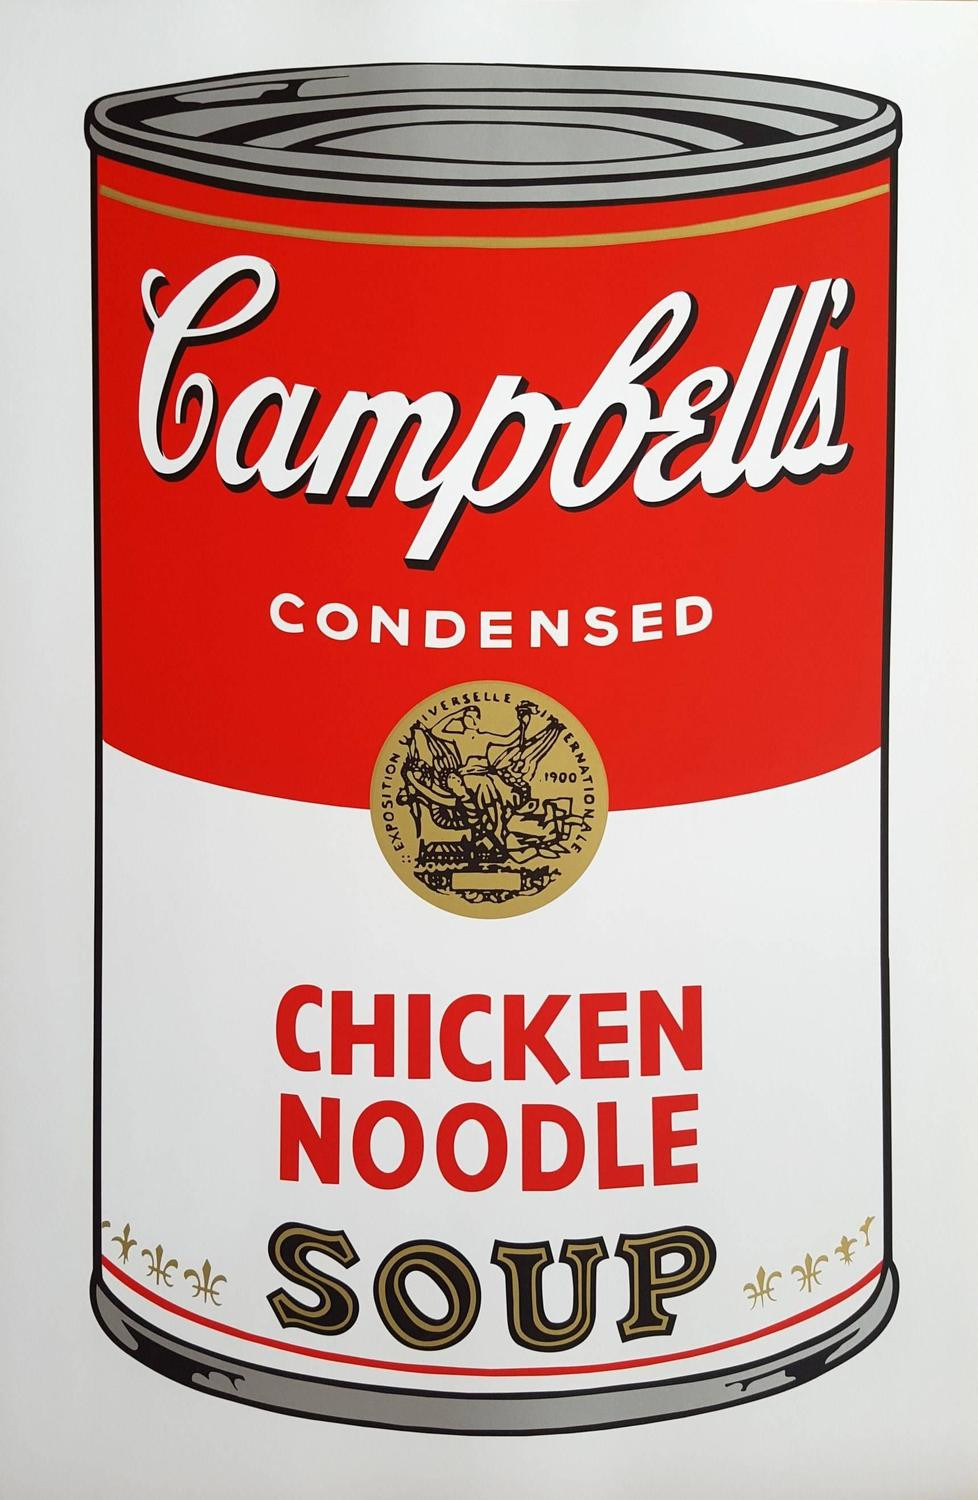 Top 30 Campbells Chicken Noodle soup - Best Recipes Ideas and Collections